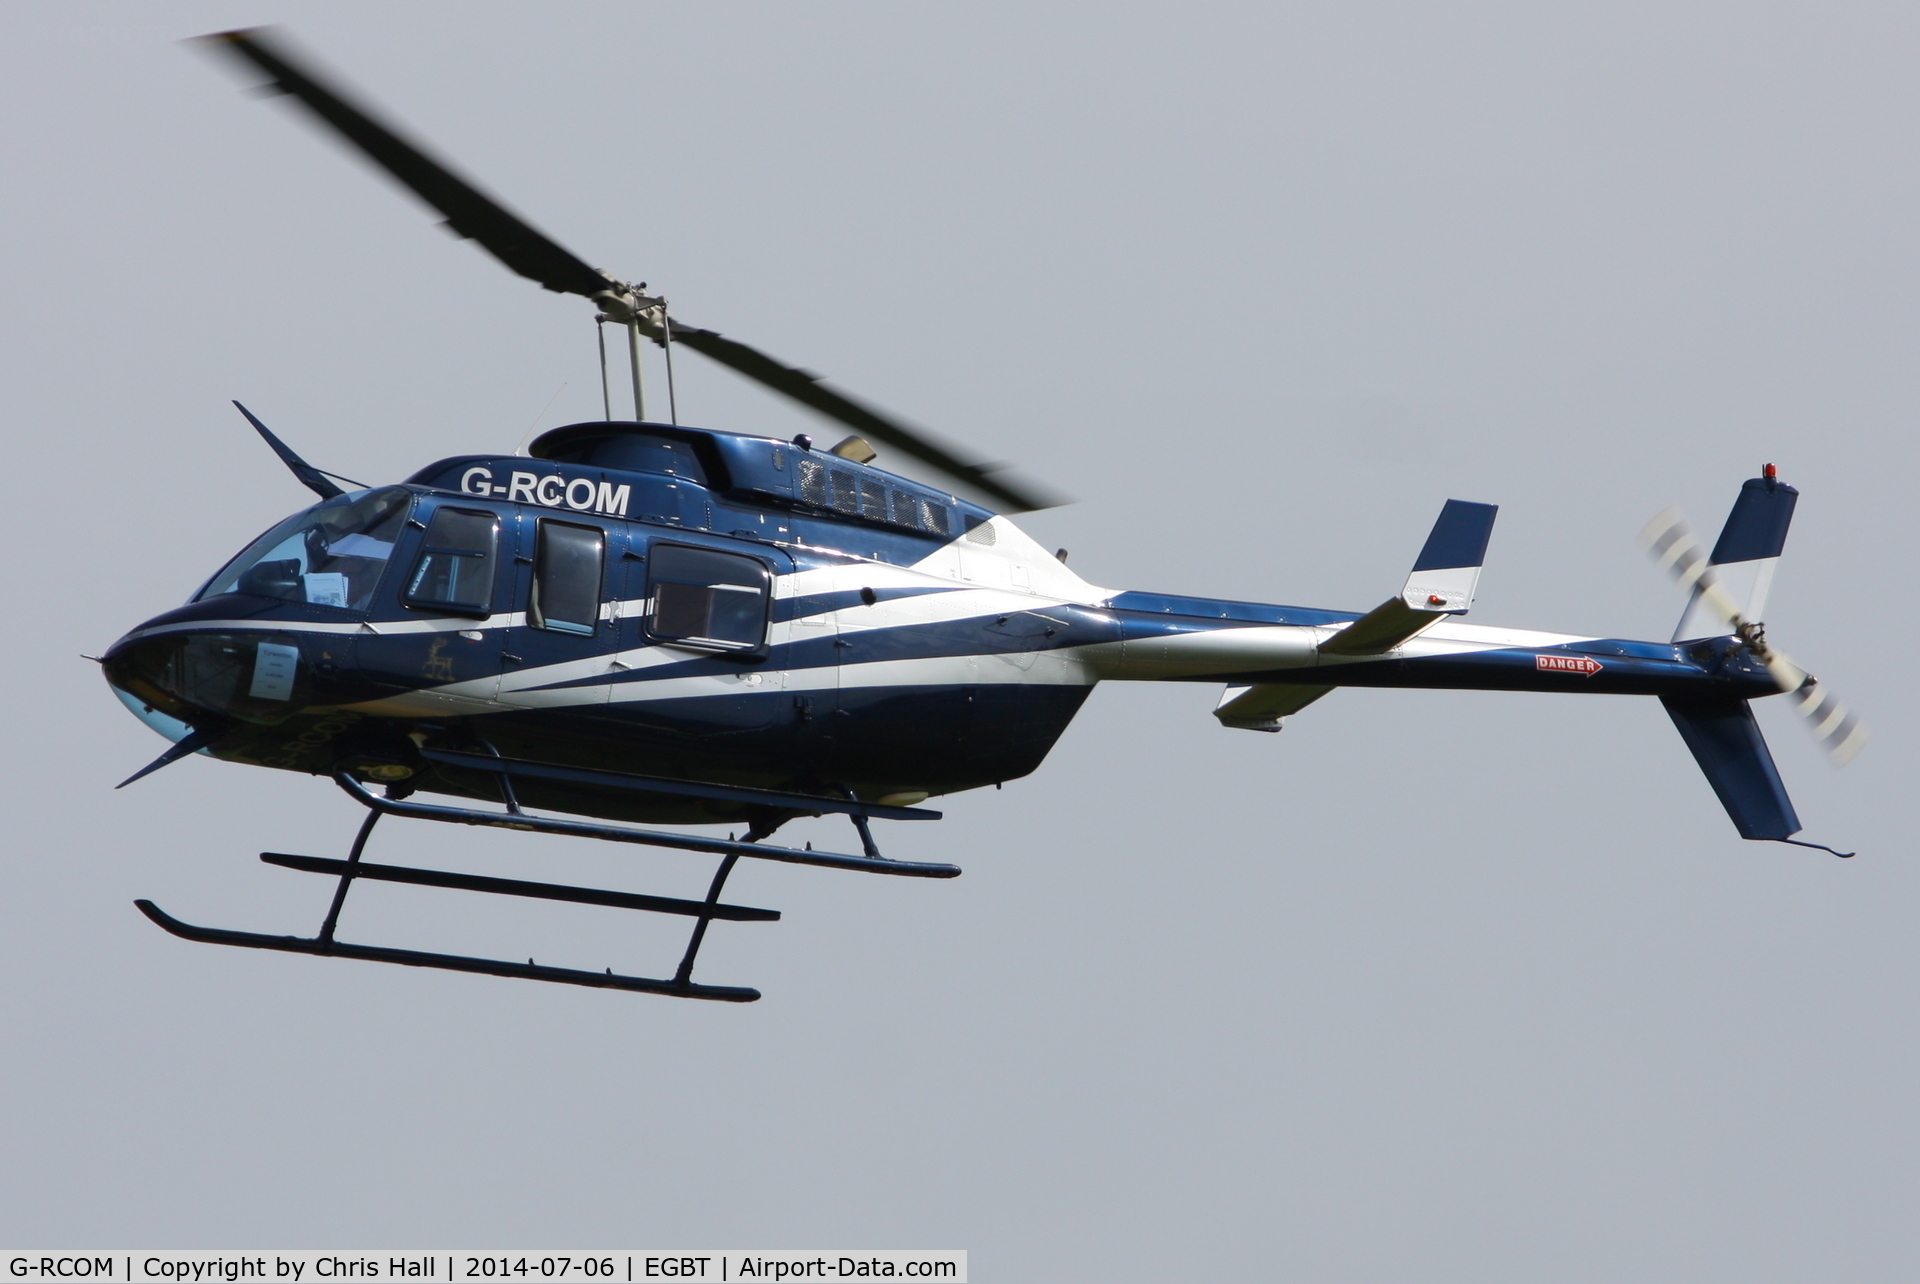 G-RCOM, 1992 Bell 206L-3 LongRanger III C/N 51599, ferrying race fans to the British F1 Grand Prix at Silverstone